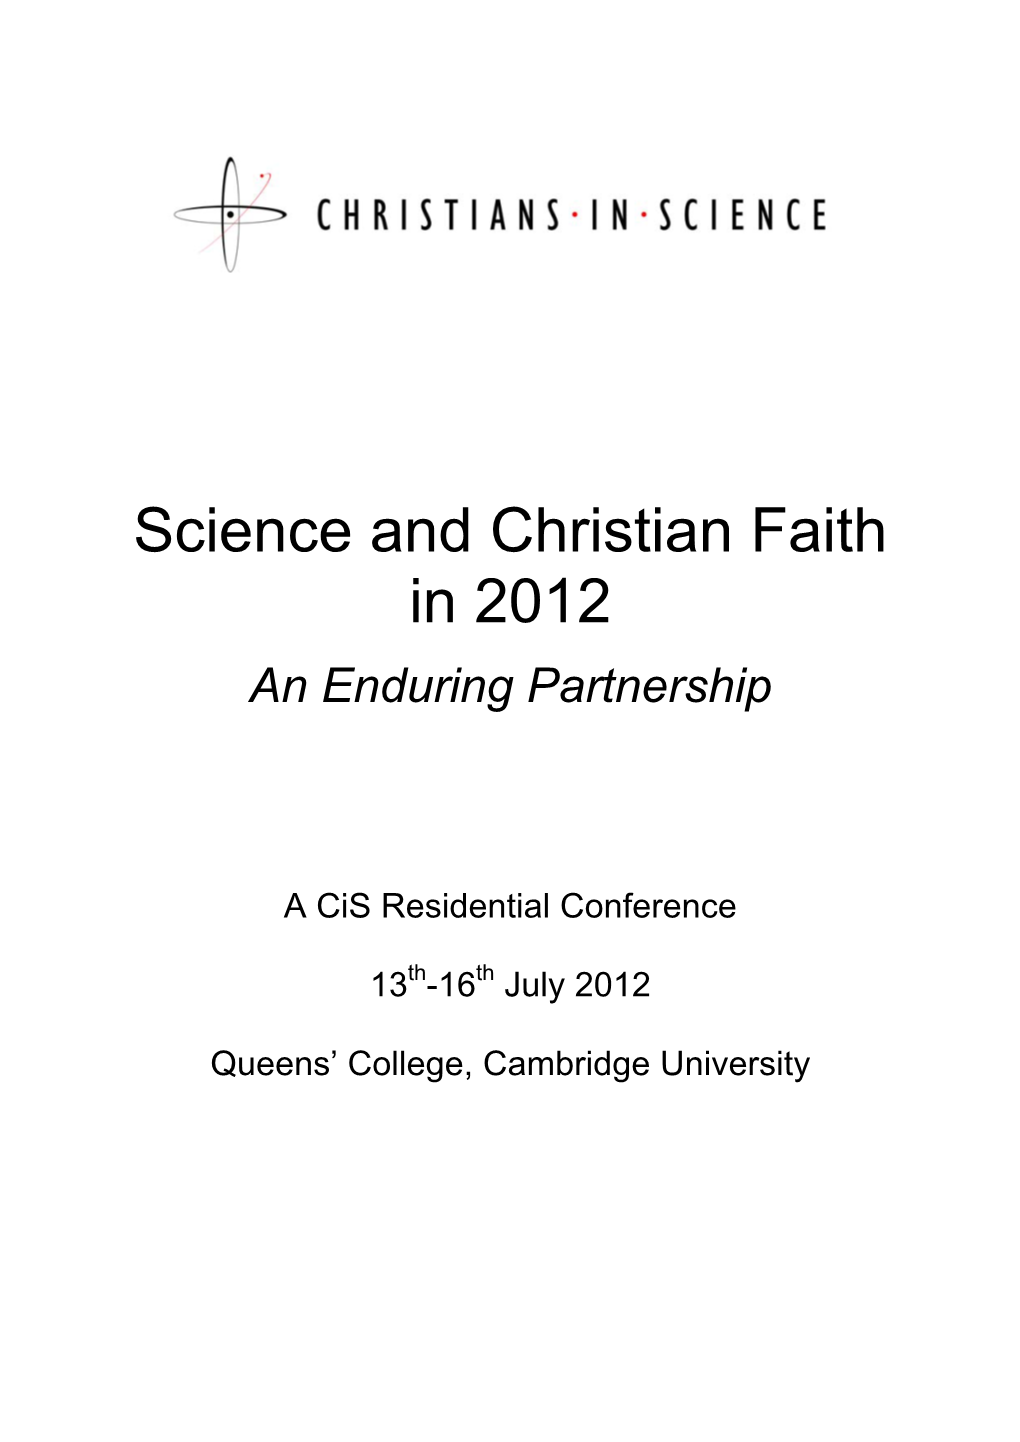 Science and Christian Faith in 2012